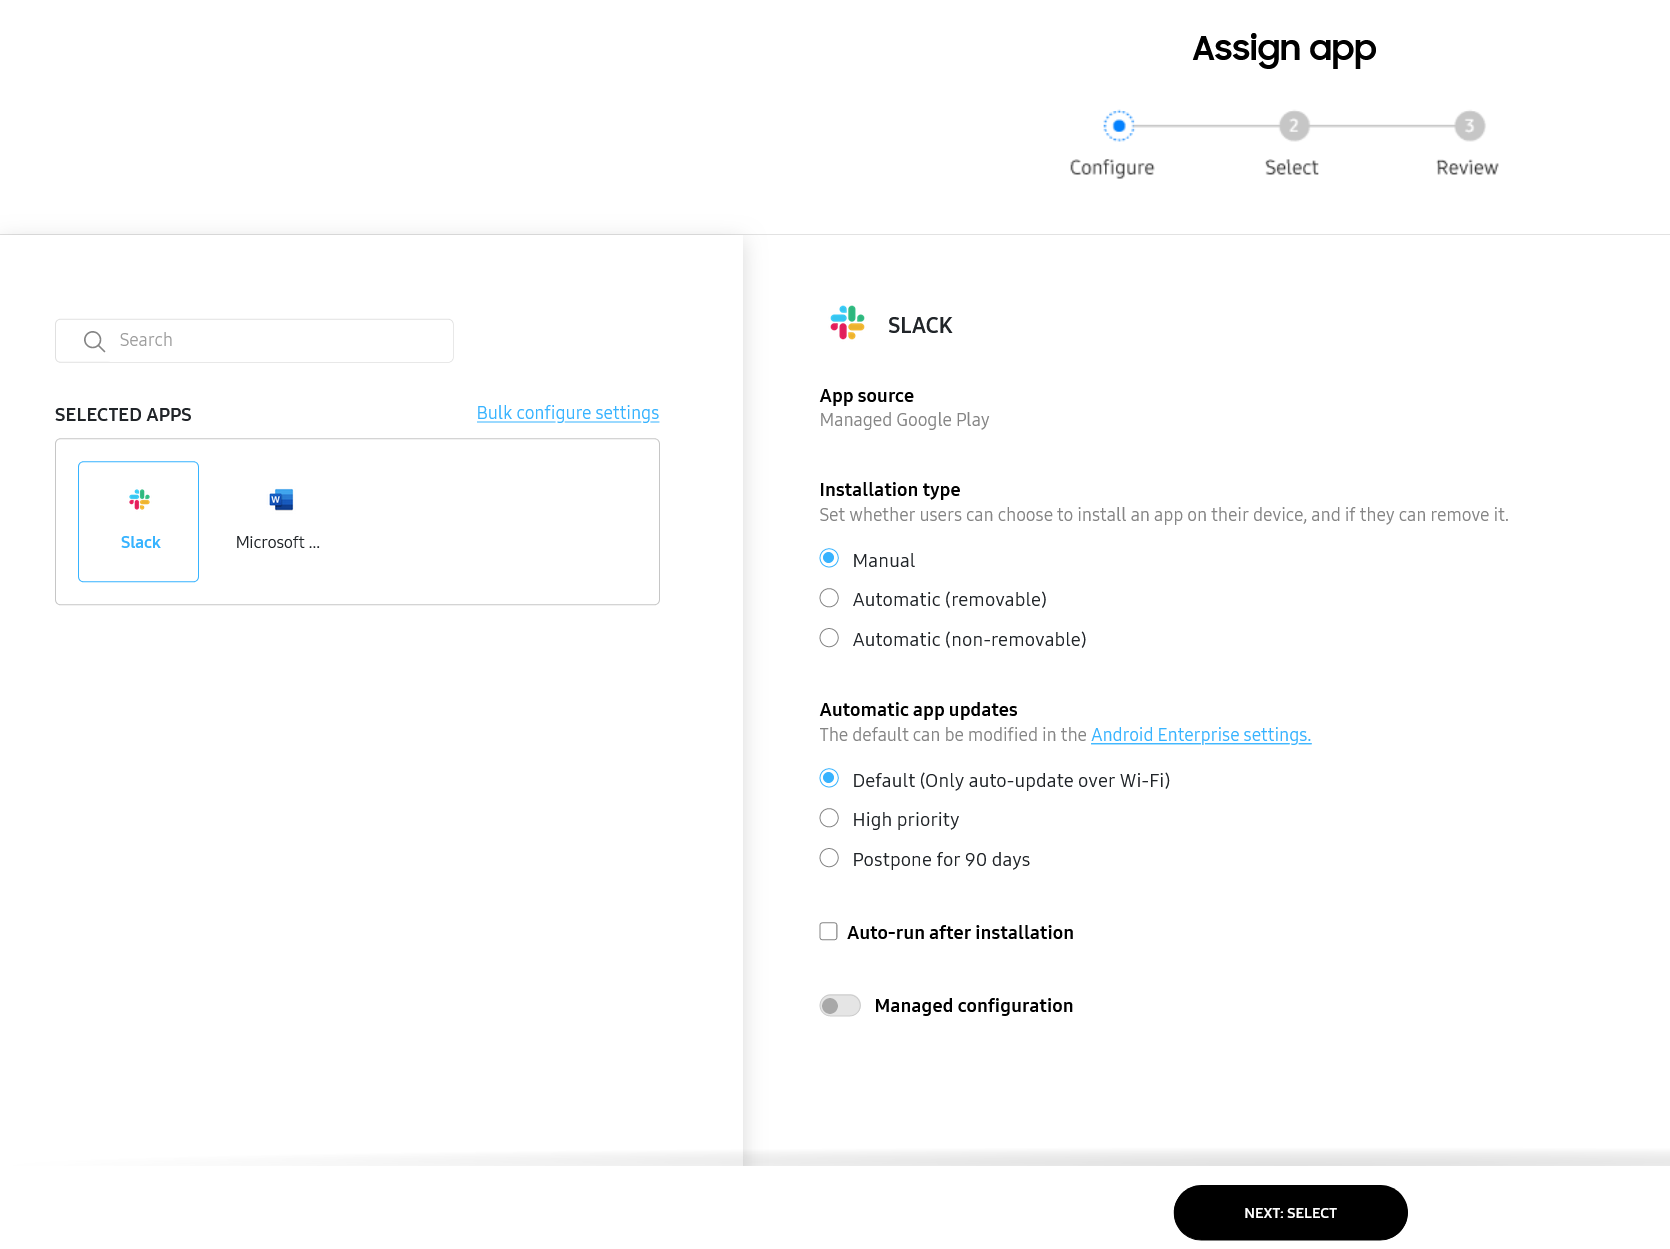 Assign app page